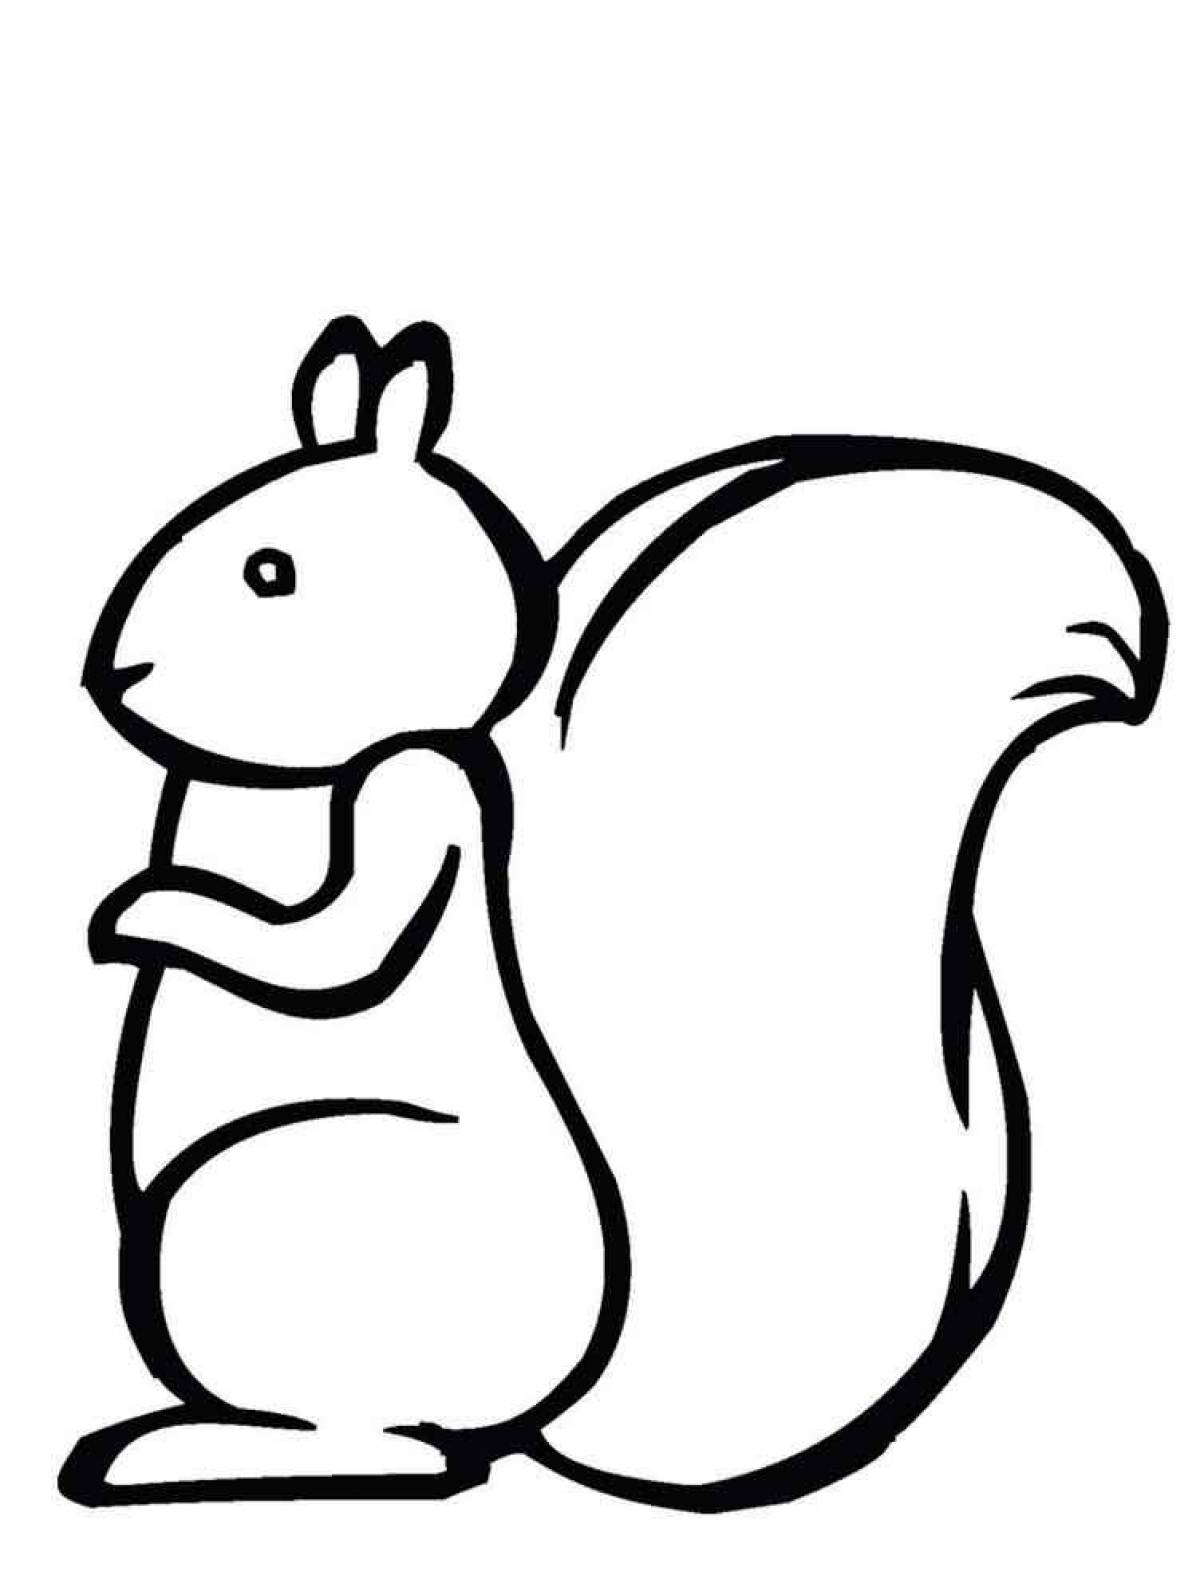 Funny squirrel coloring book for kids